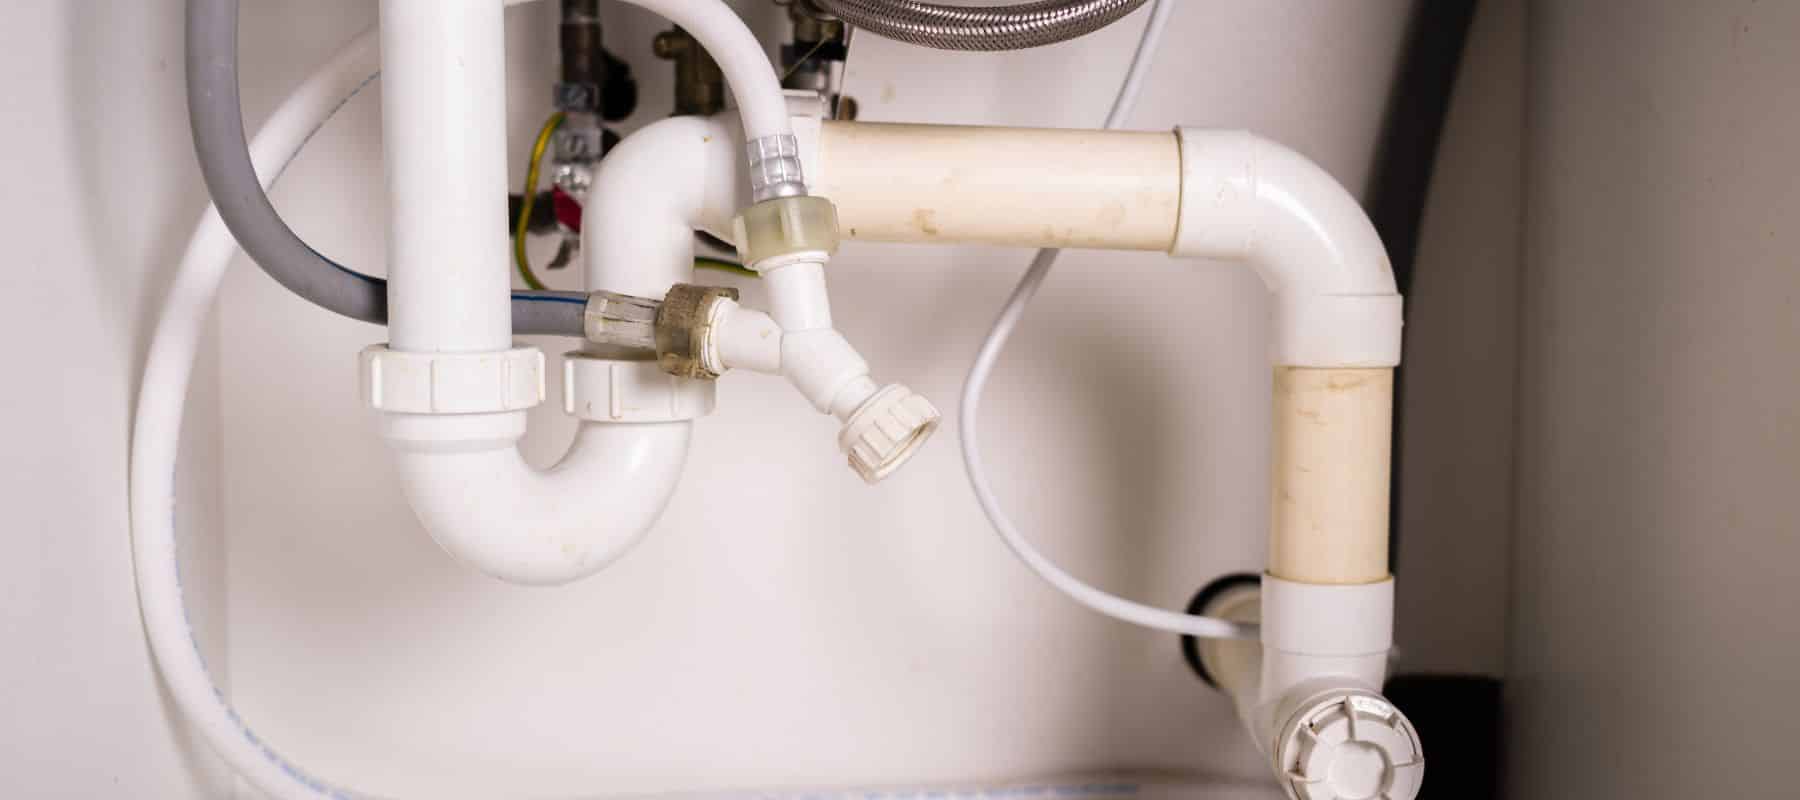 plumbing services image